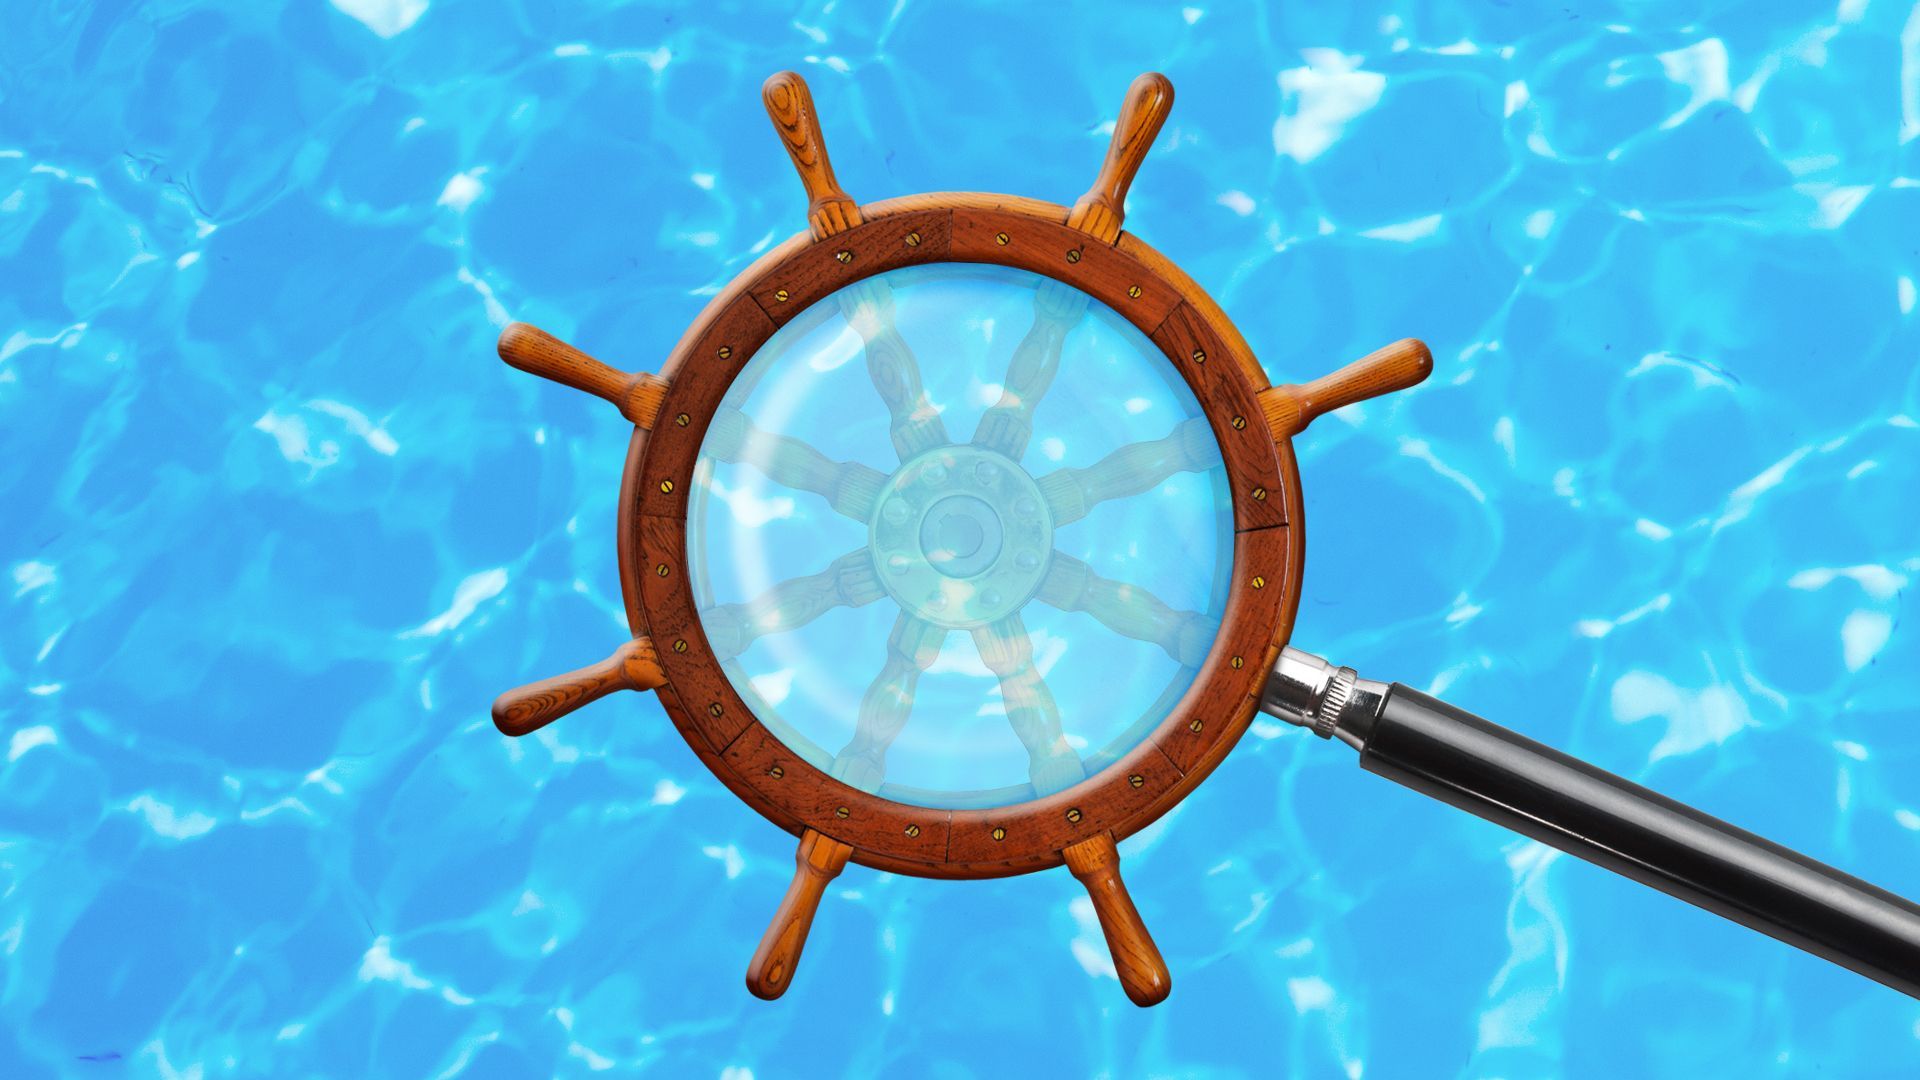 Illustration of a ship's steering wheel in the form of a magnifying glass over water